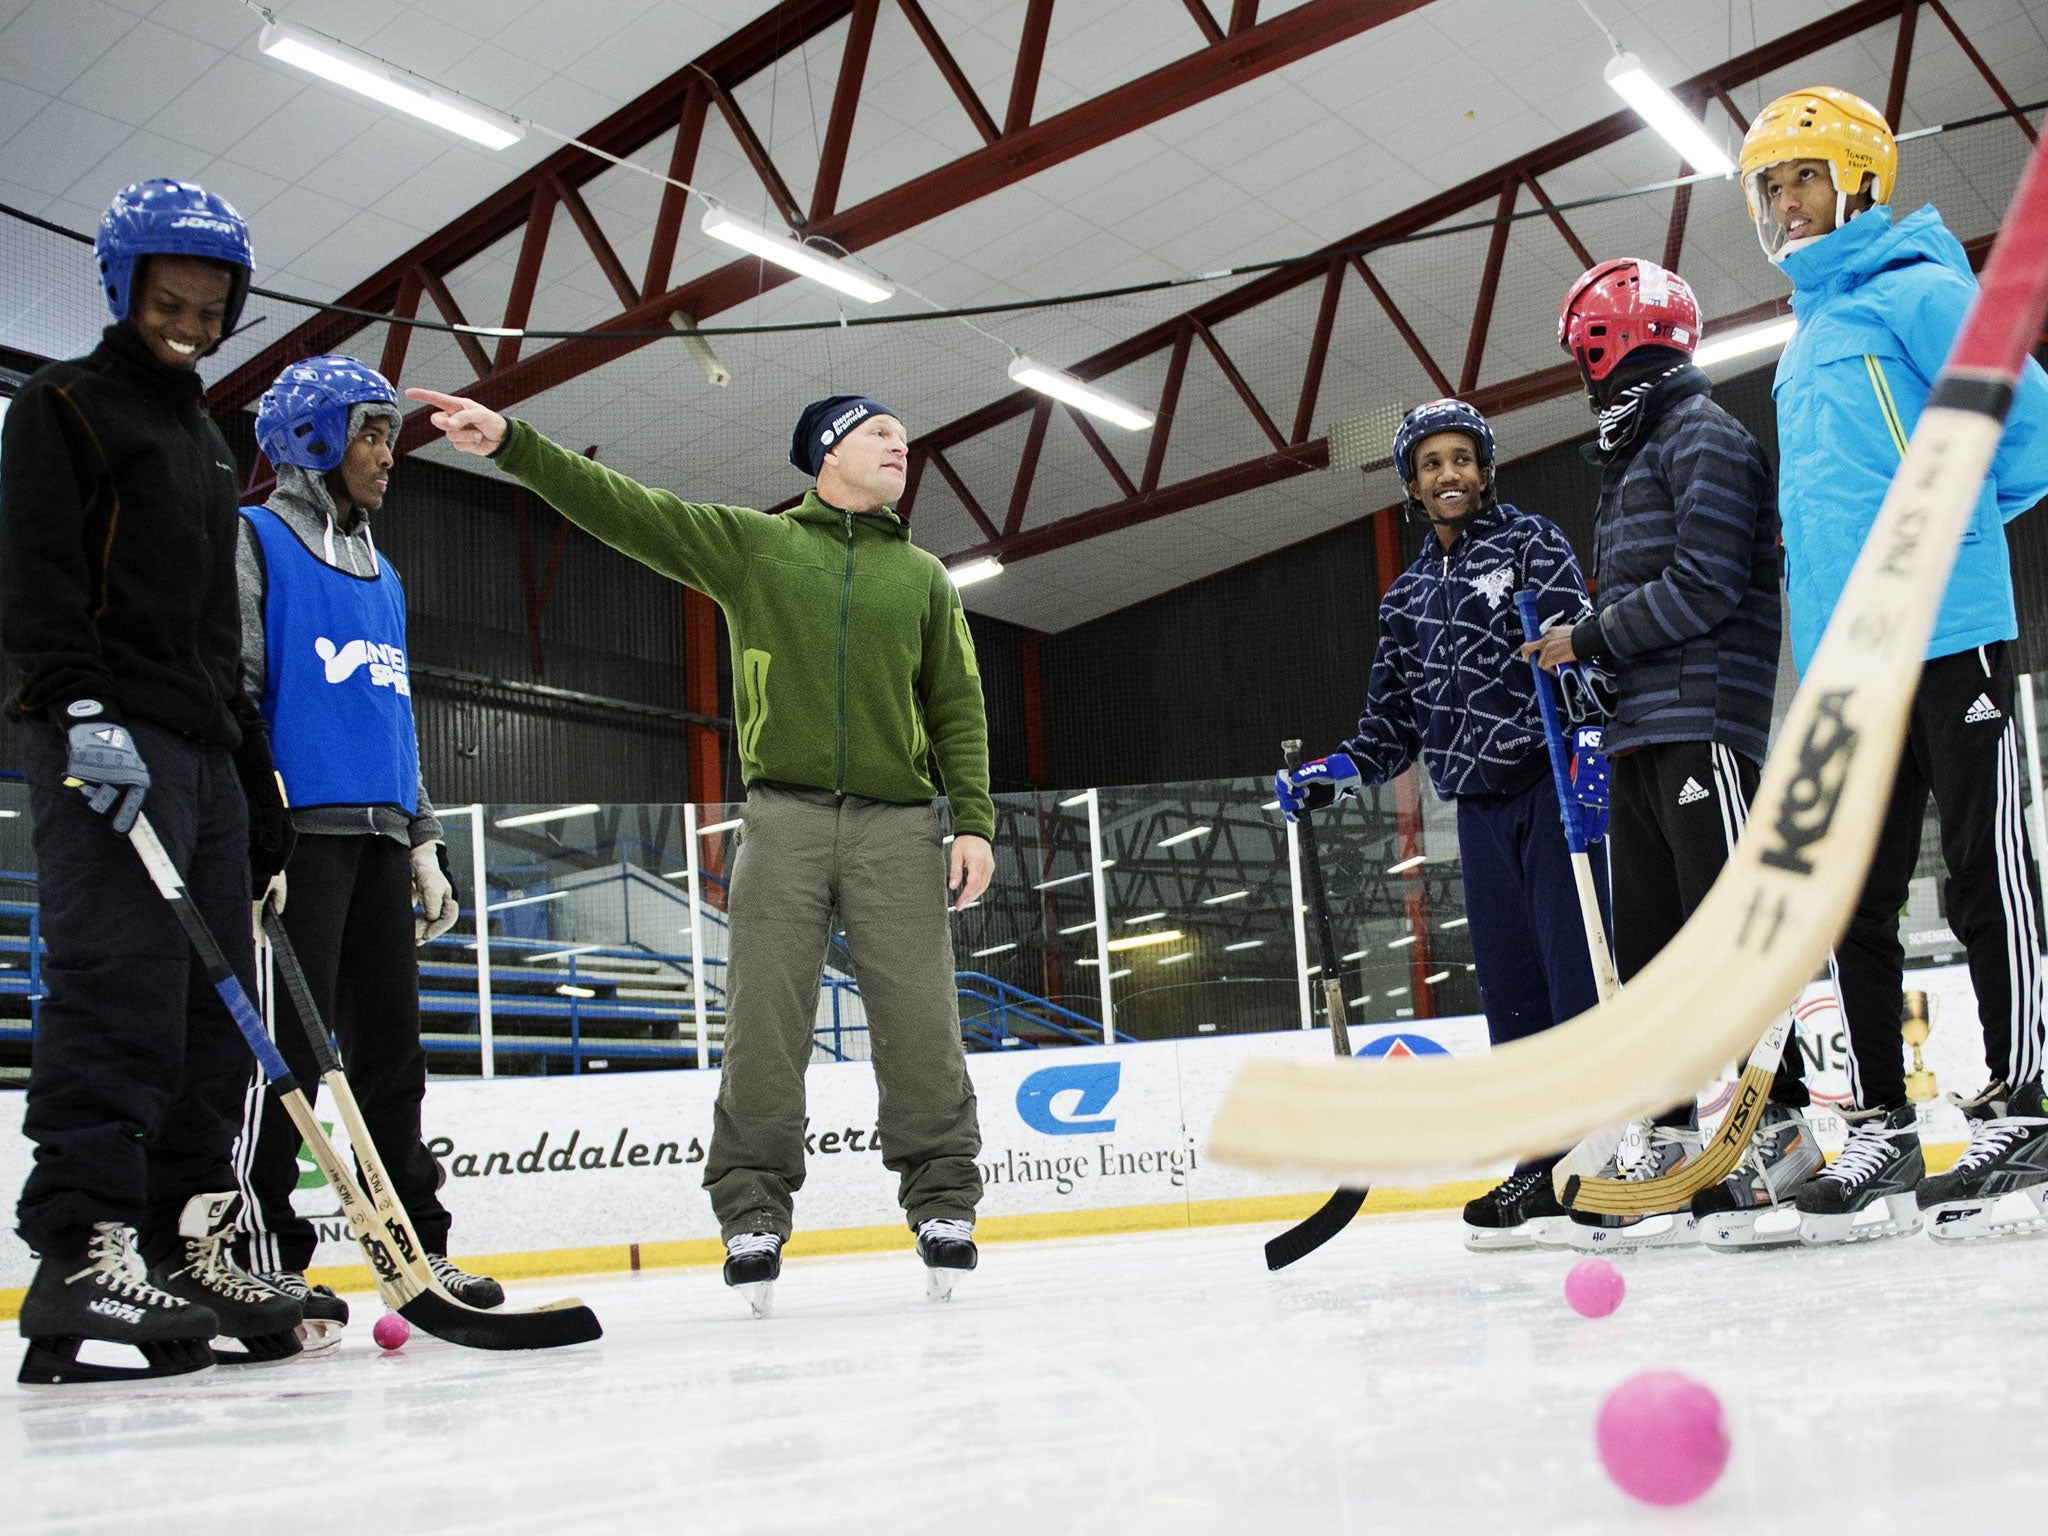 The Somali ice-bandy team practising with coach Per Fosshaug in Sweden